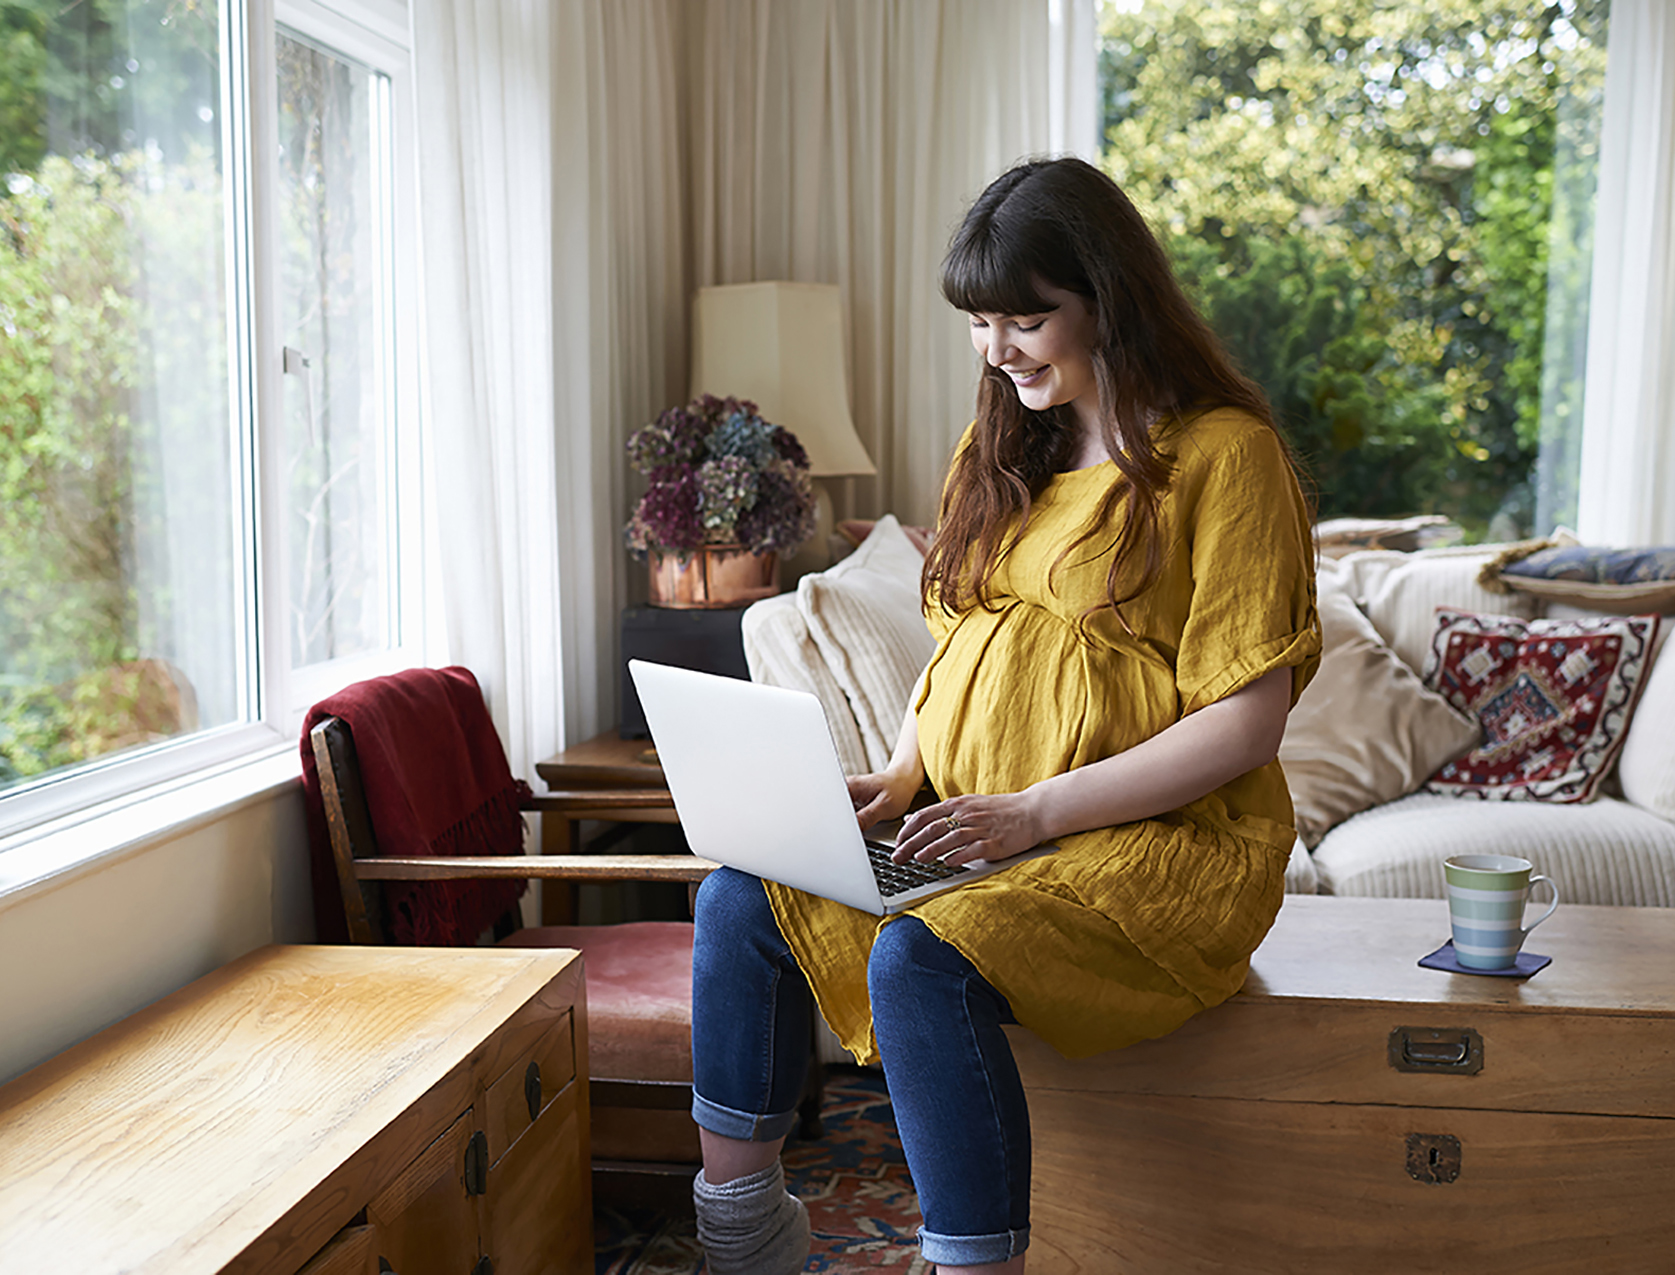 Pregnant woman smiling while using laptop at home